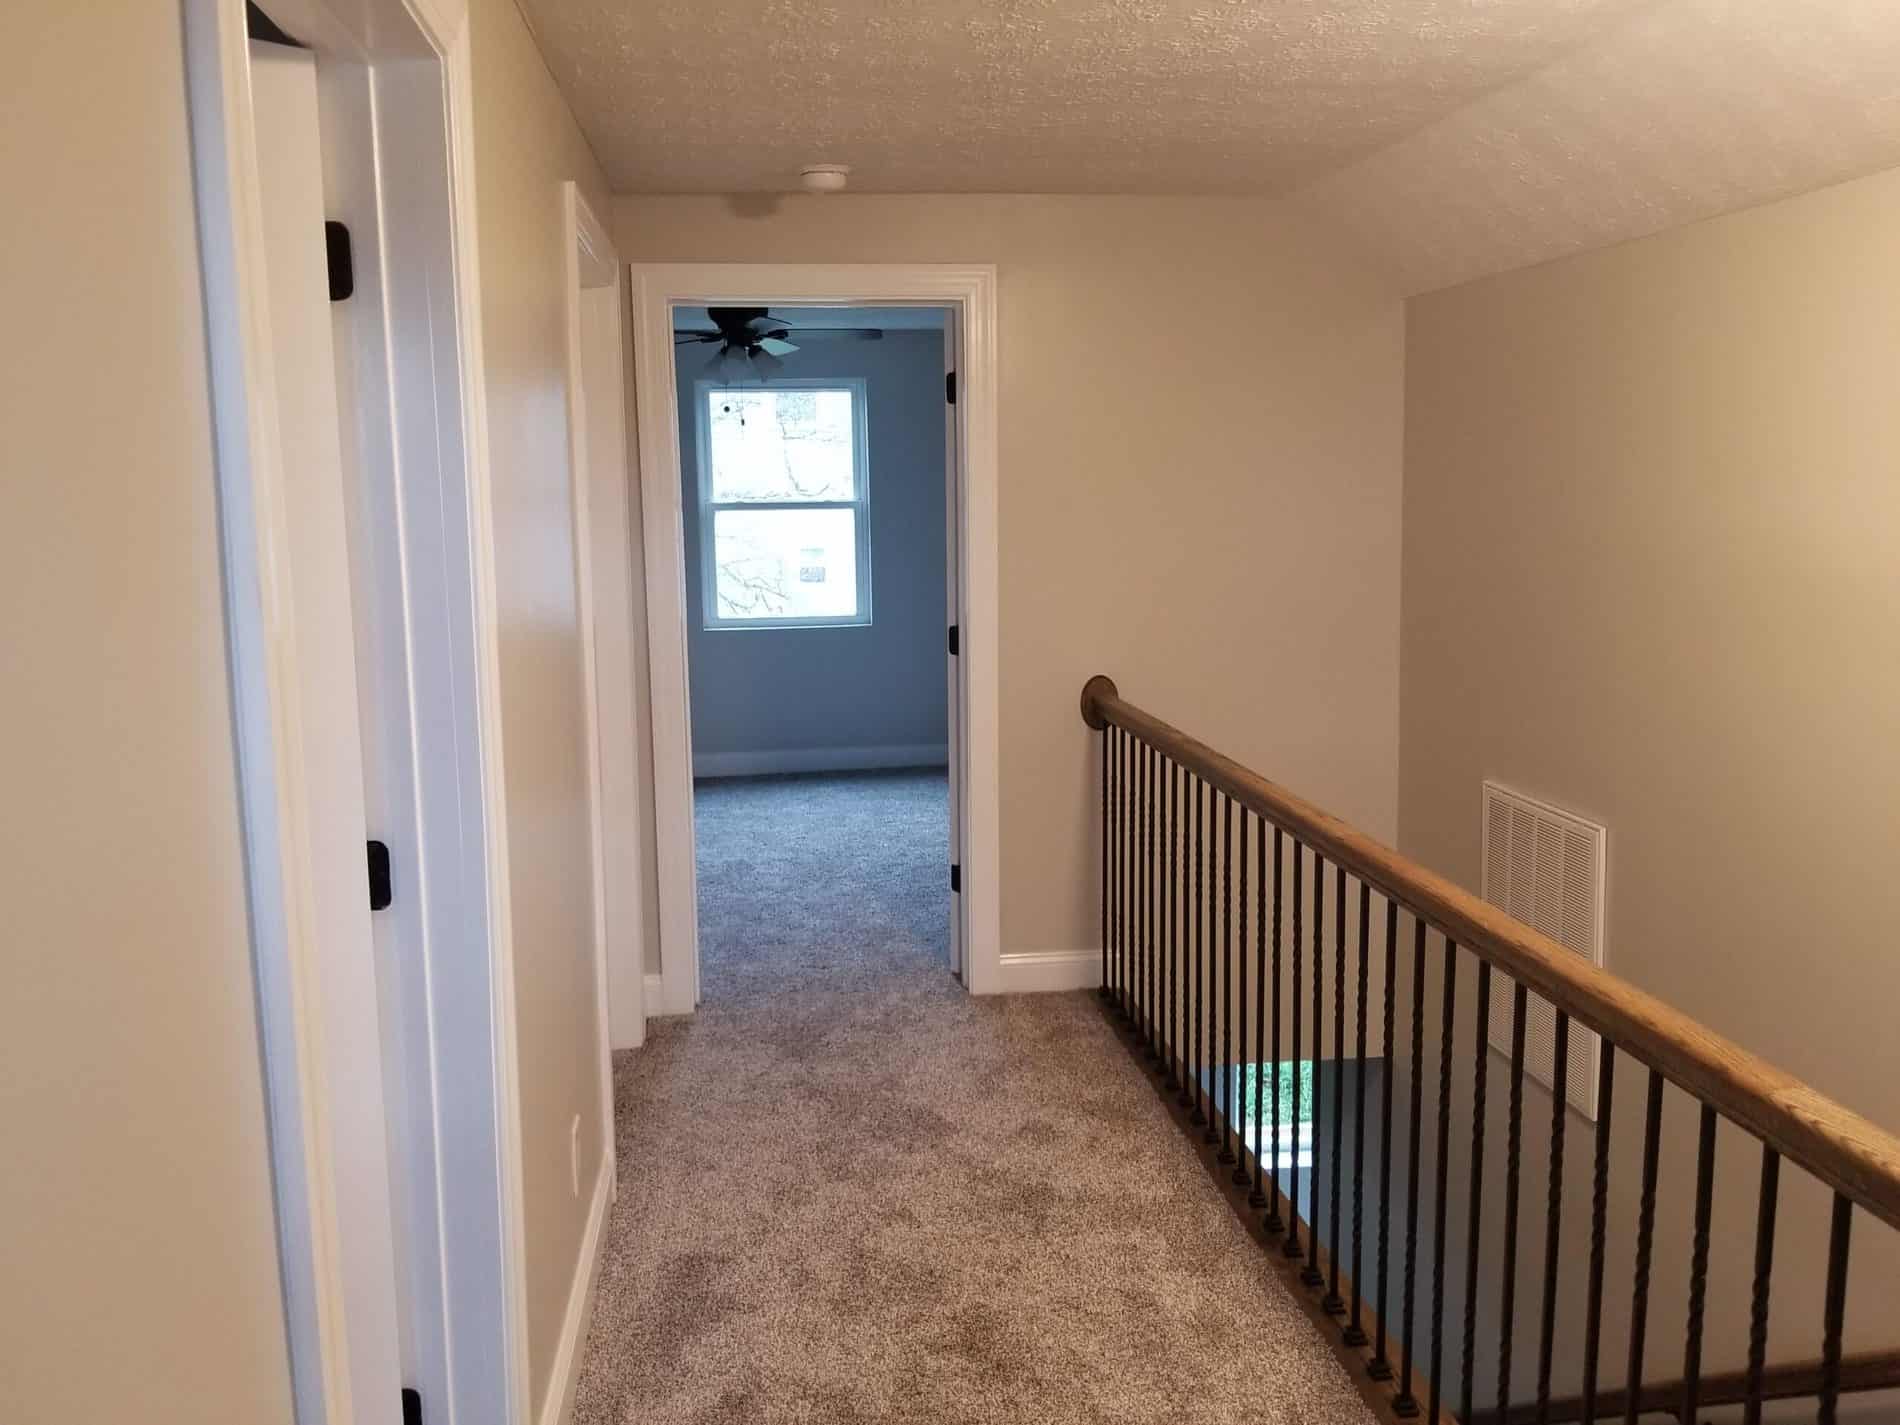 Home Remodel with hallway on second floor